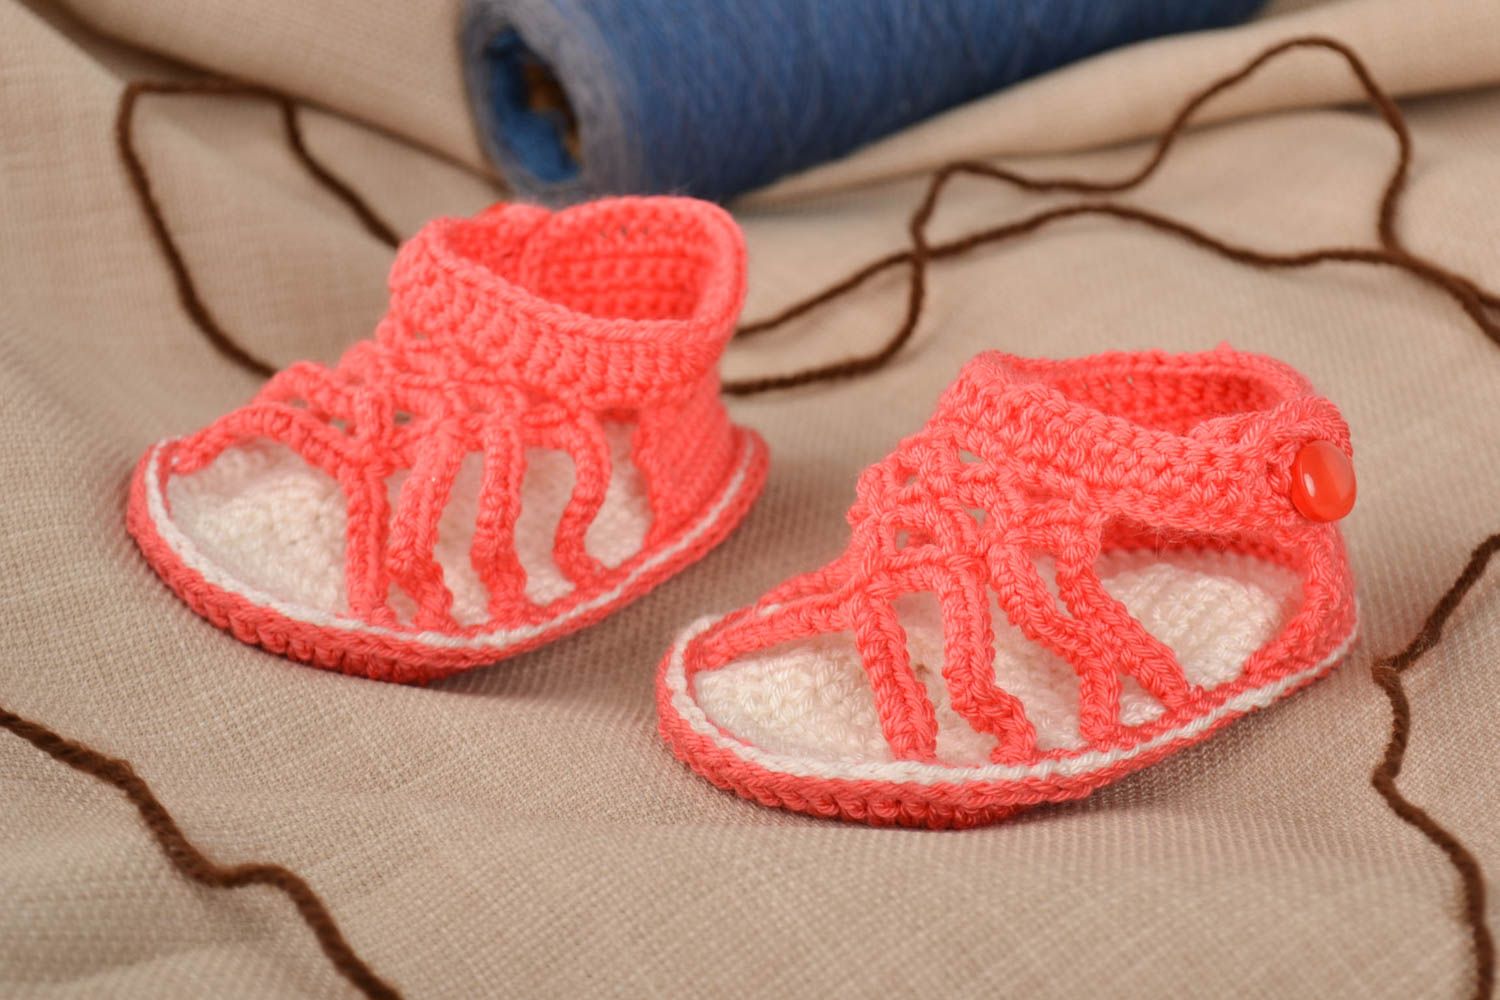 Handmade crocheted baby bootees unusual cute warn sandals lovely kids shoes photo 1